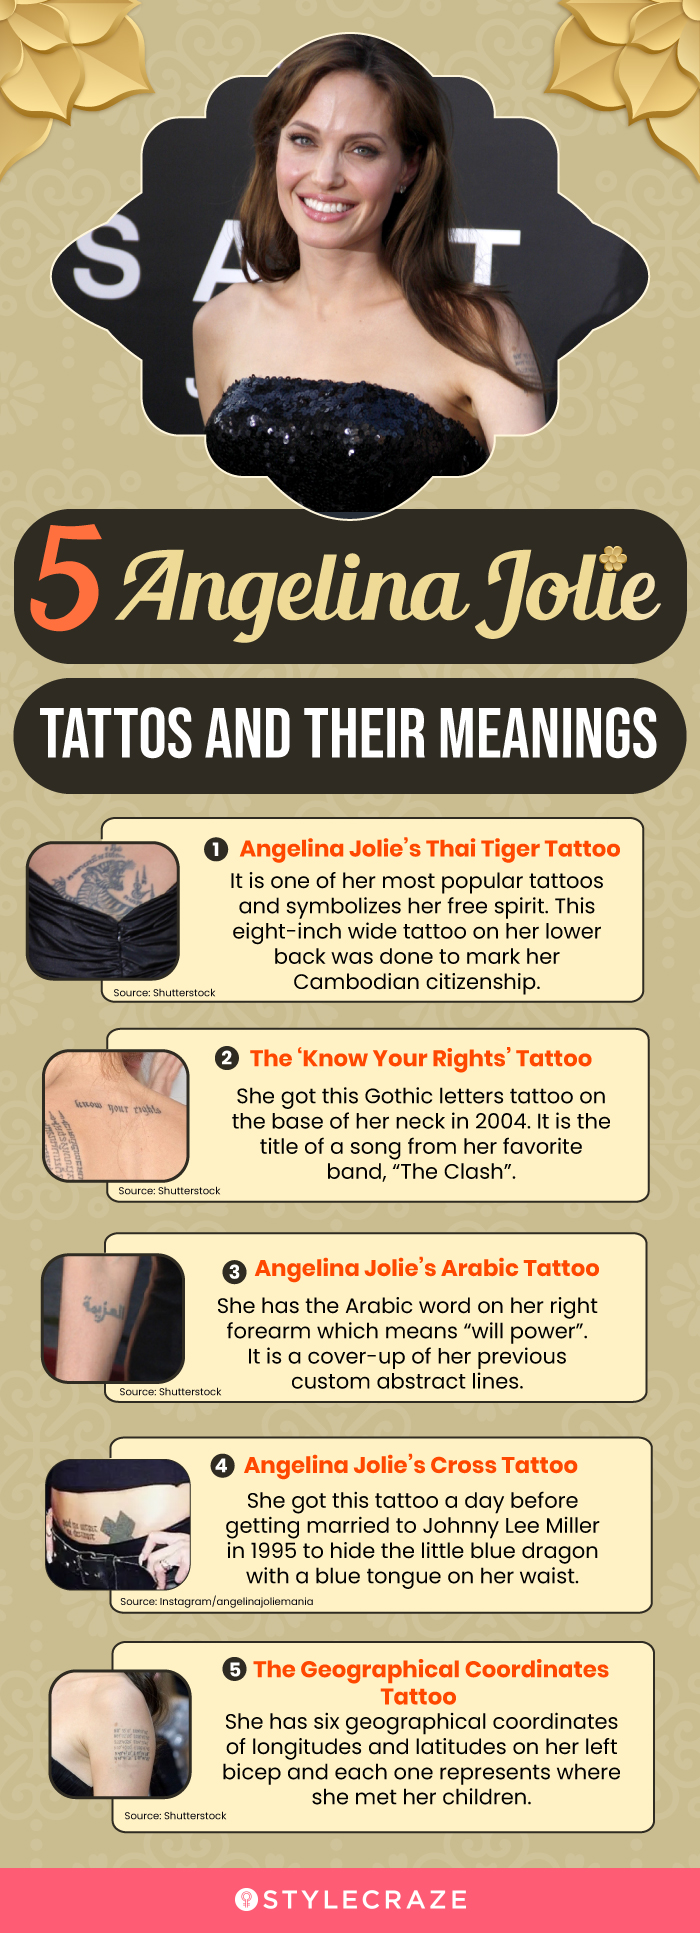 5angelina jolie tattos and their meanings (infographic)